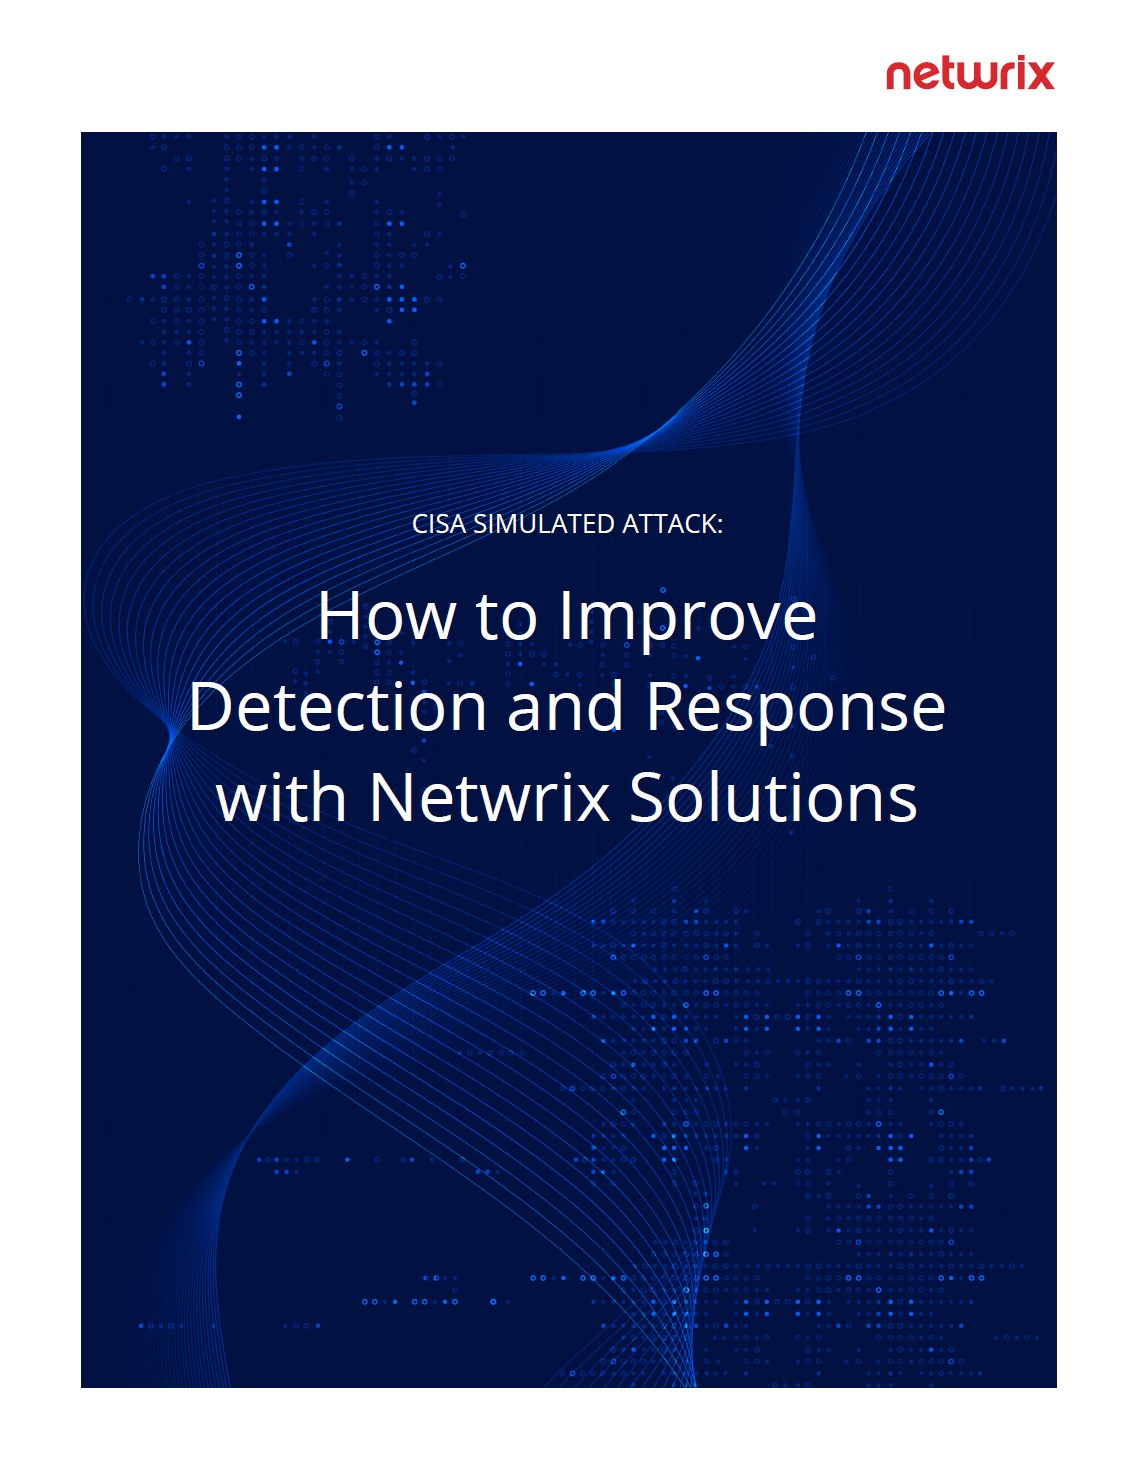 CISA Simulated Attack: How to Improve Detection and Response with Netwrix Solutions